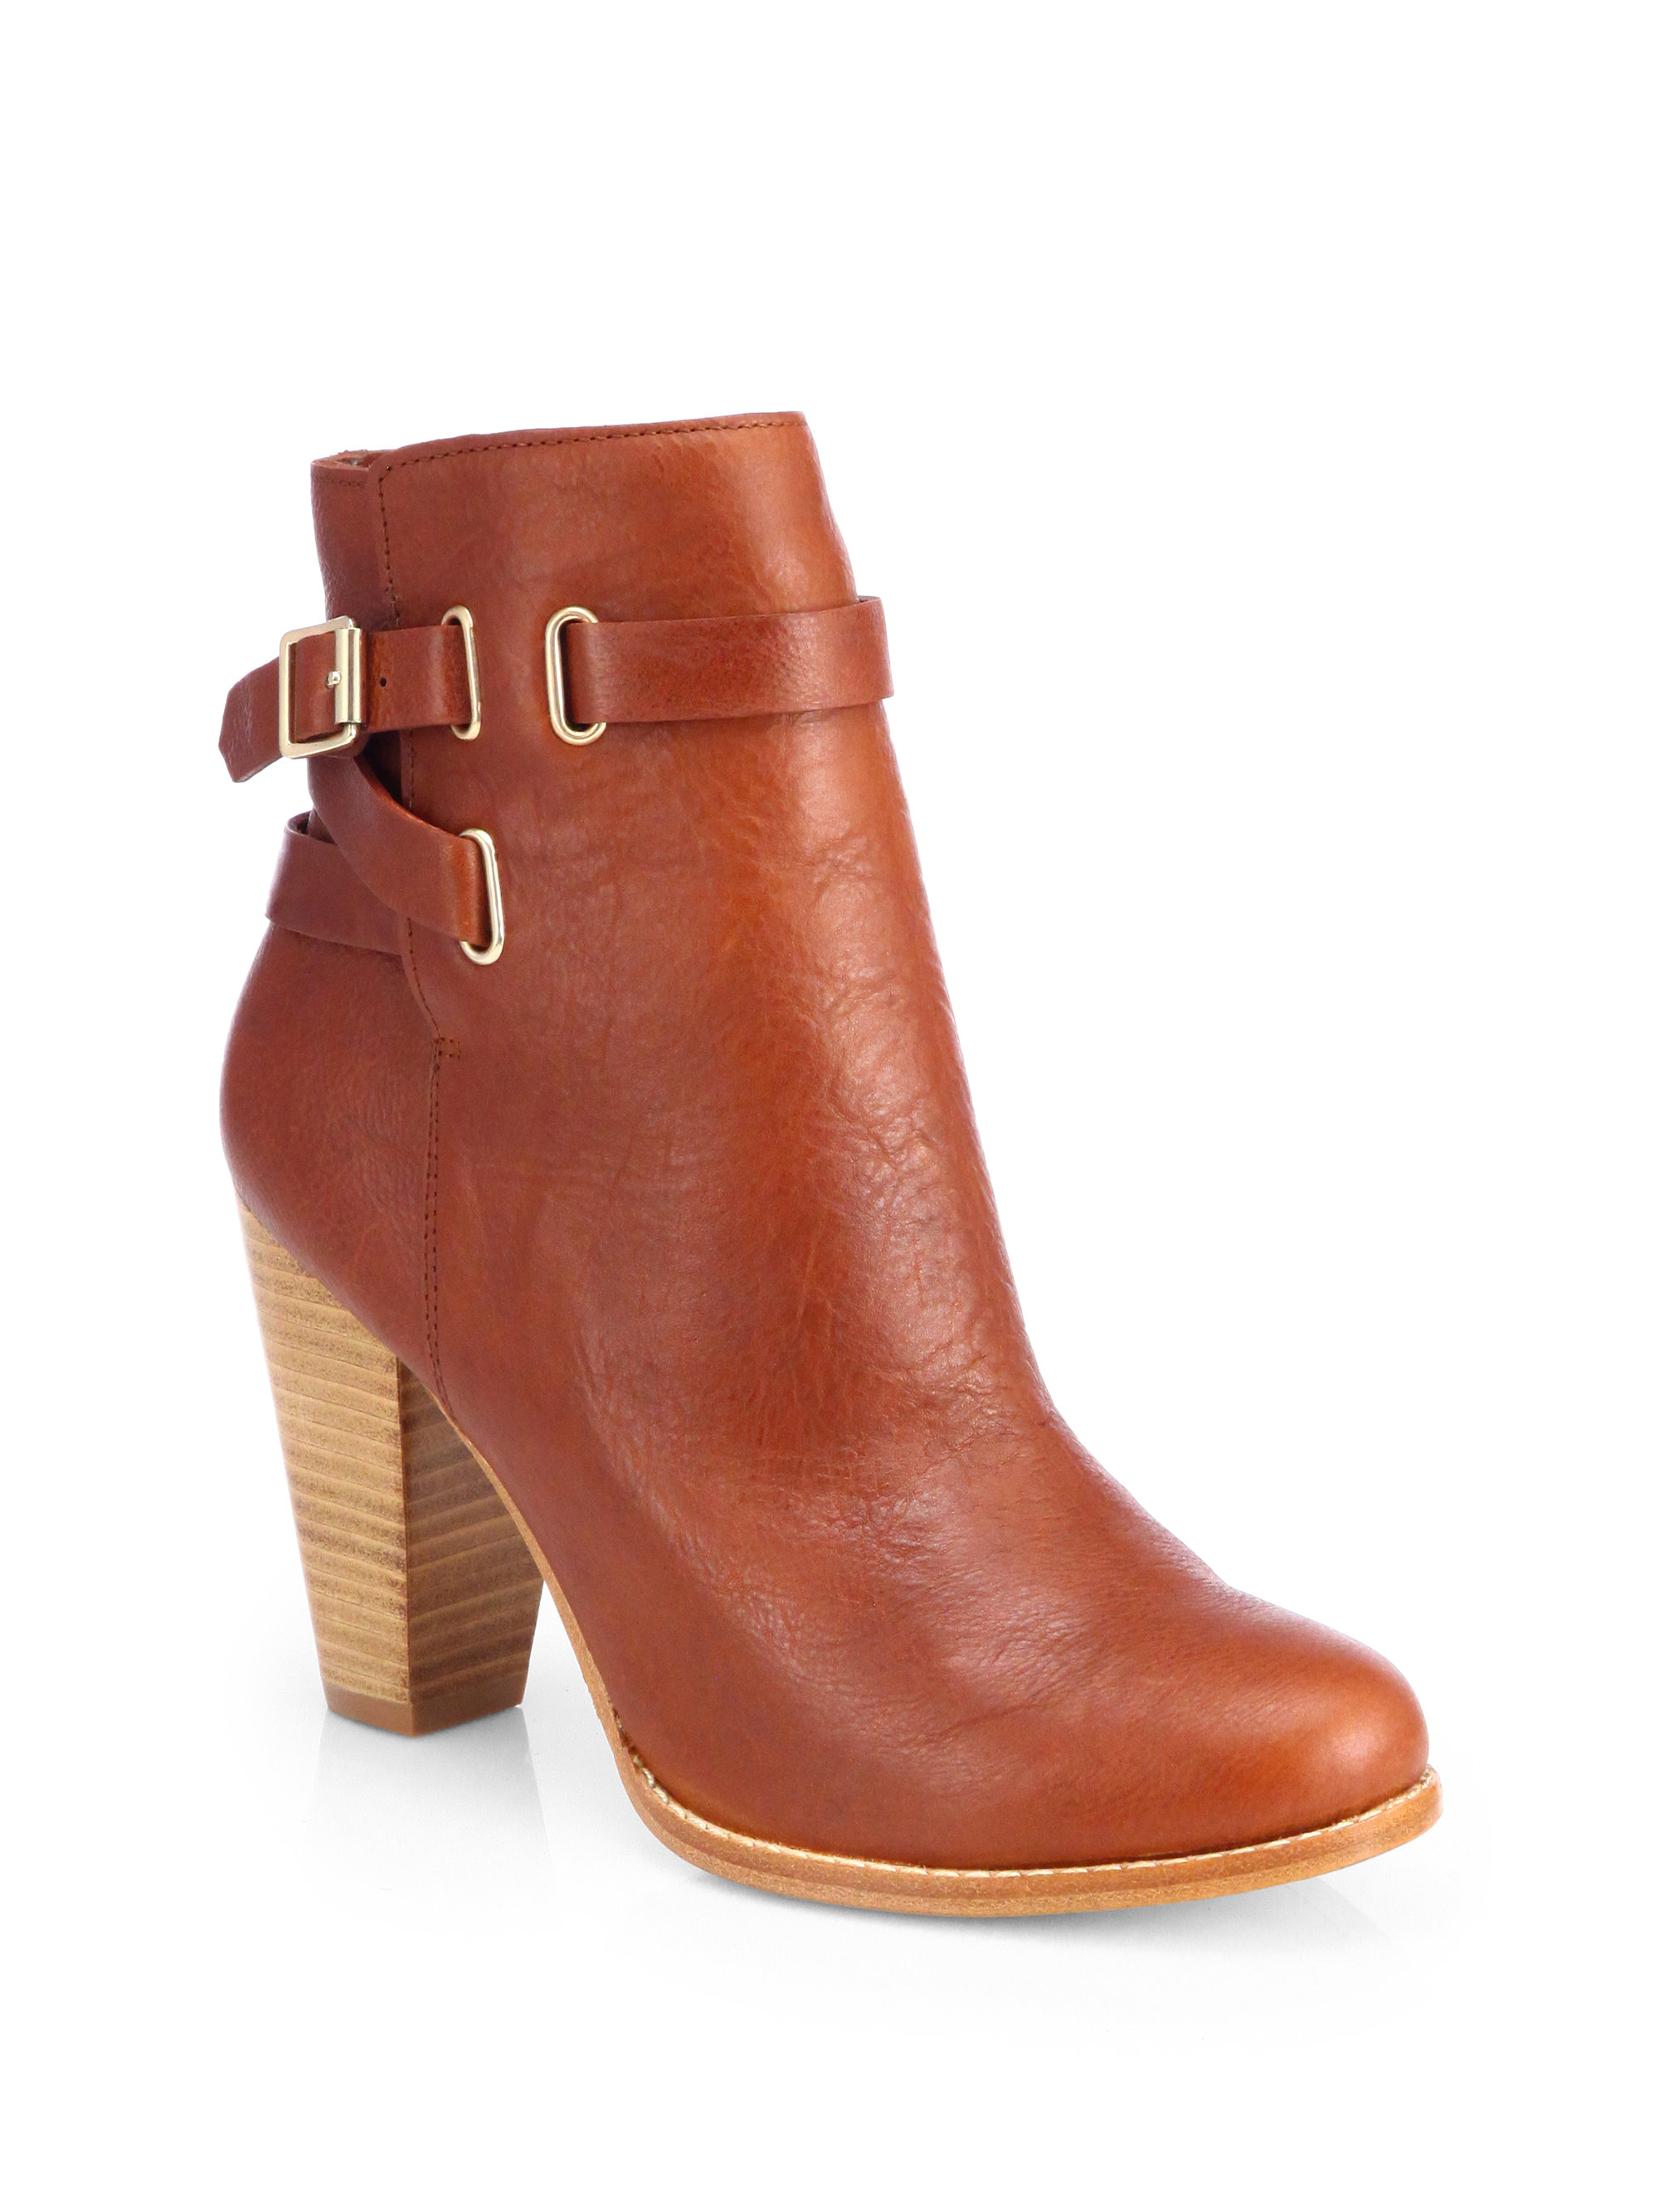 Joie Easton Ankle Boots in Brown (COGNAC) | Lyst